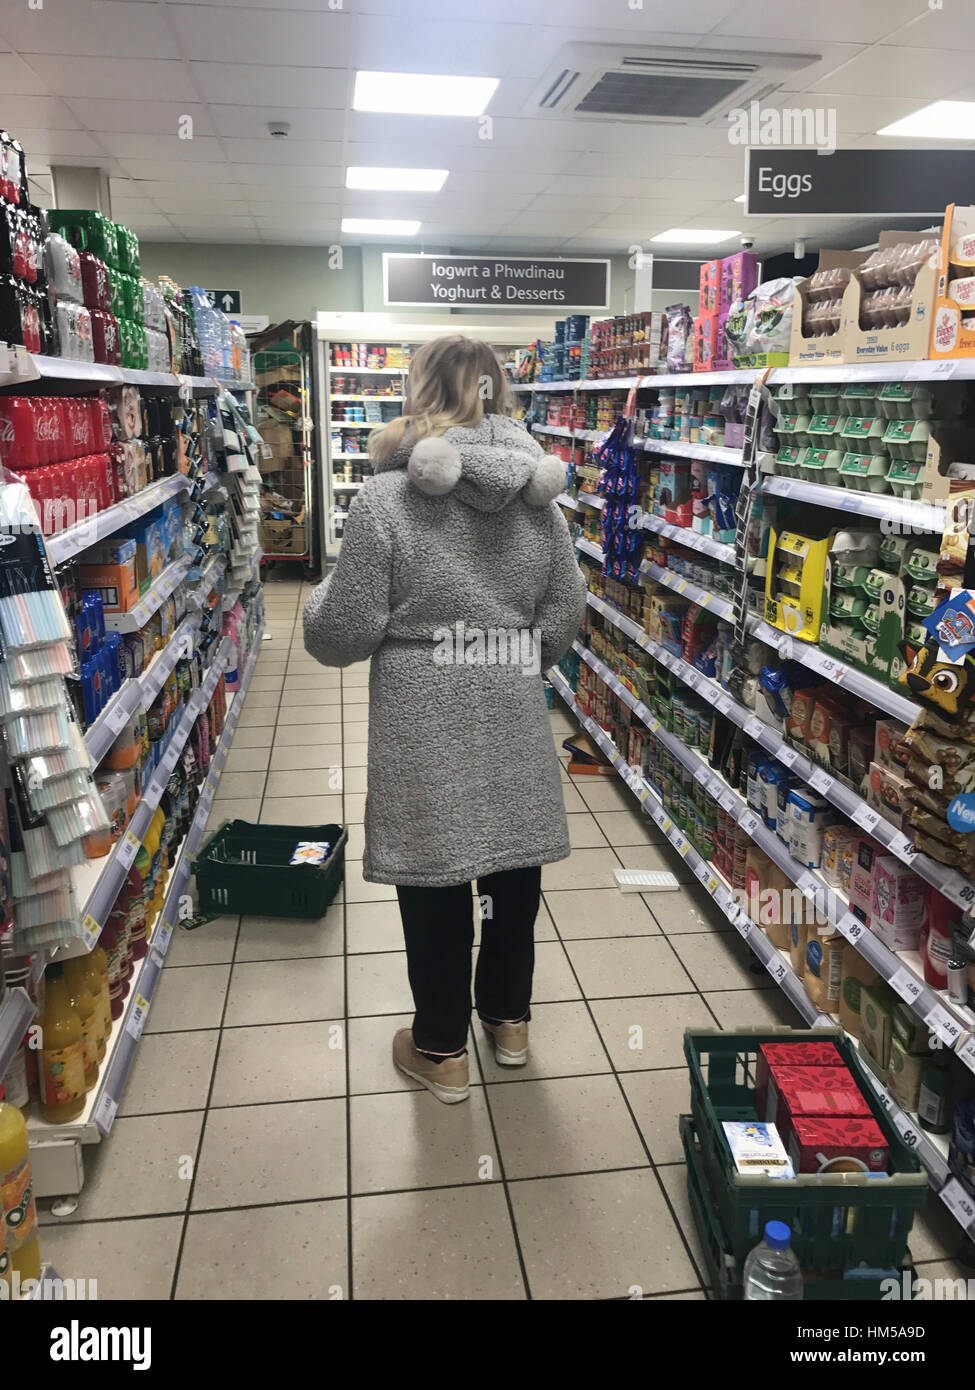 A woman female student seen shopping wearing her pyjammas and dressing gown in a supermarket store in Cardiff, South Wales, UK. Stock Photo